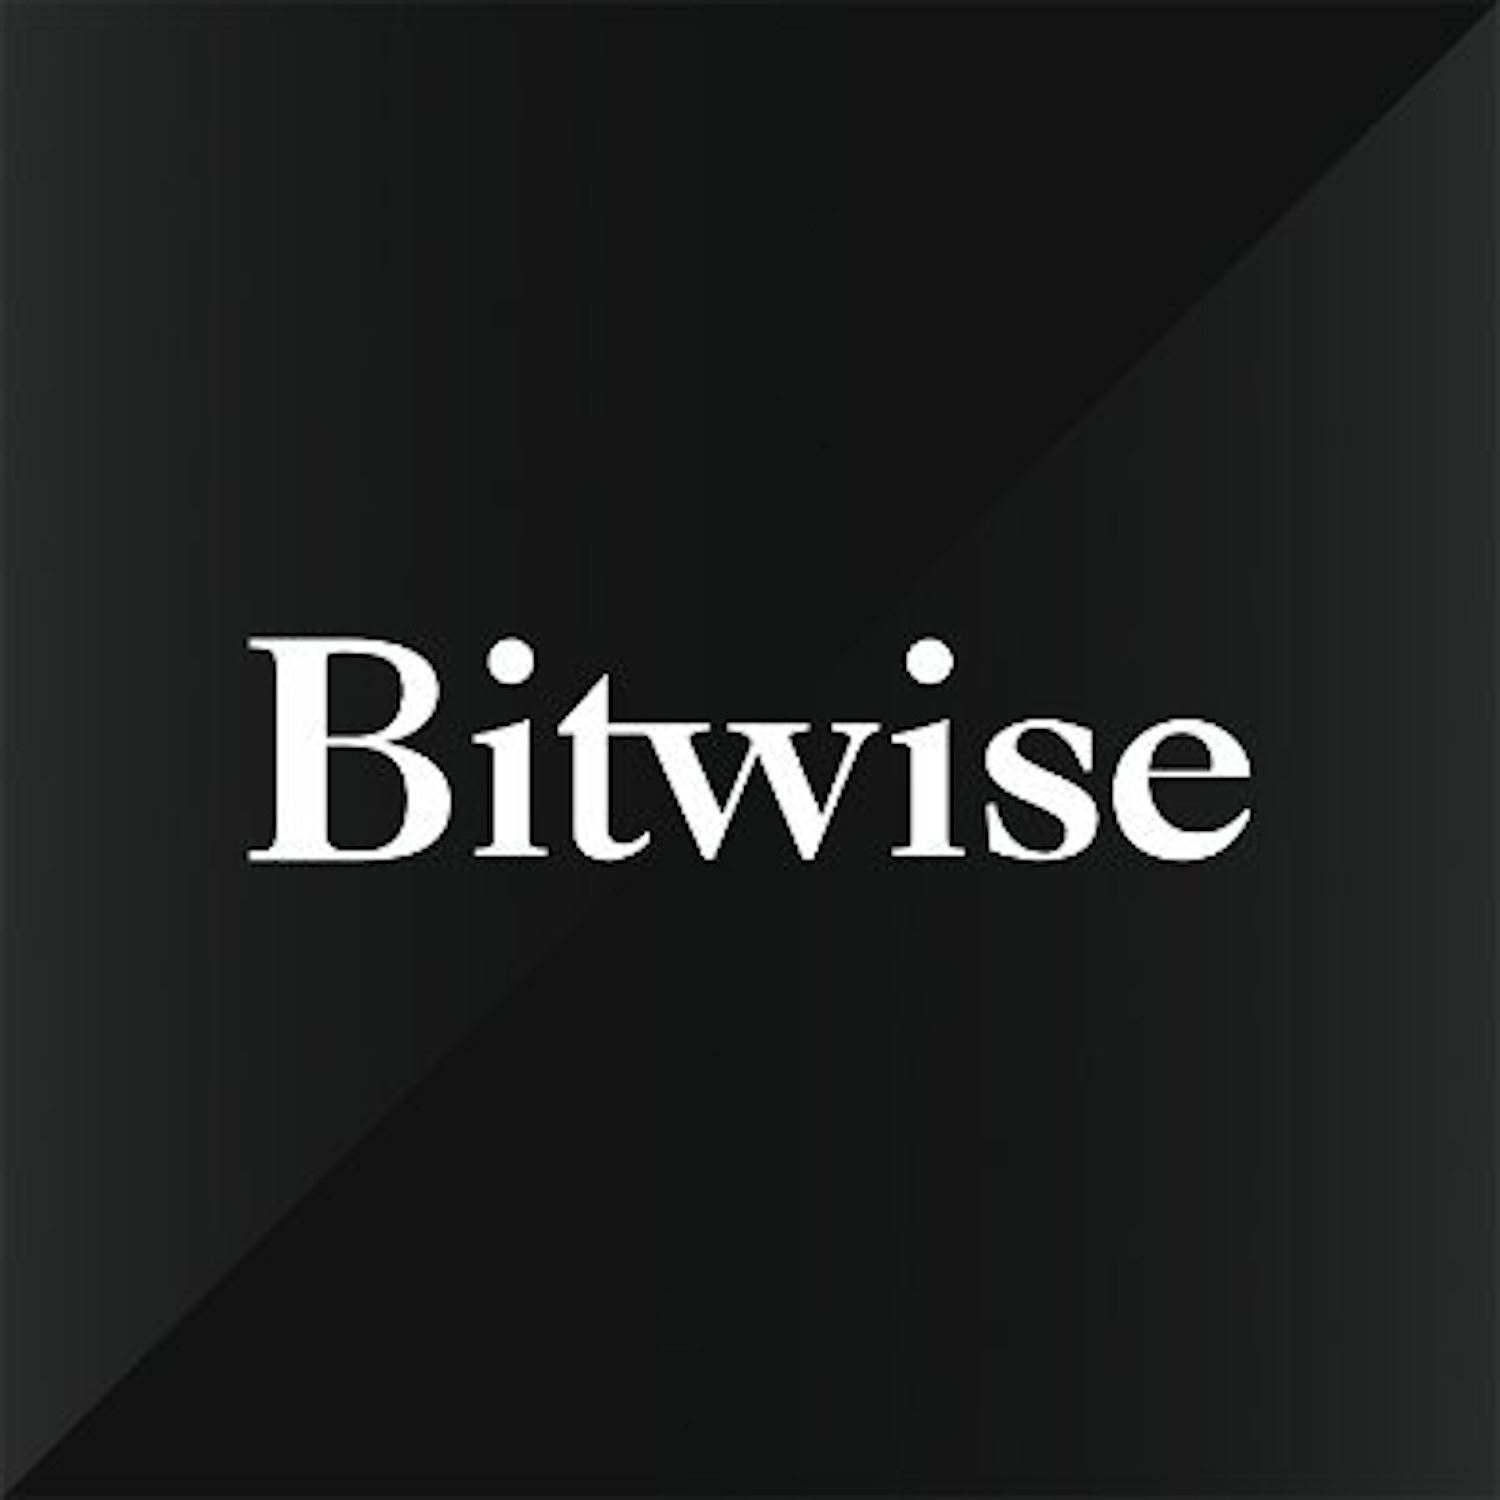 Bitwise Makes a Wise Decision